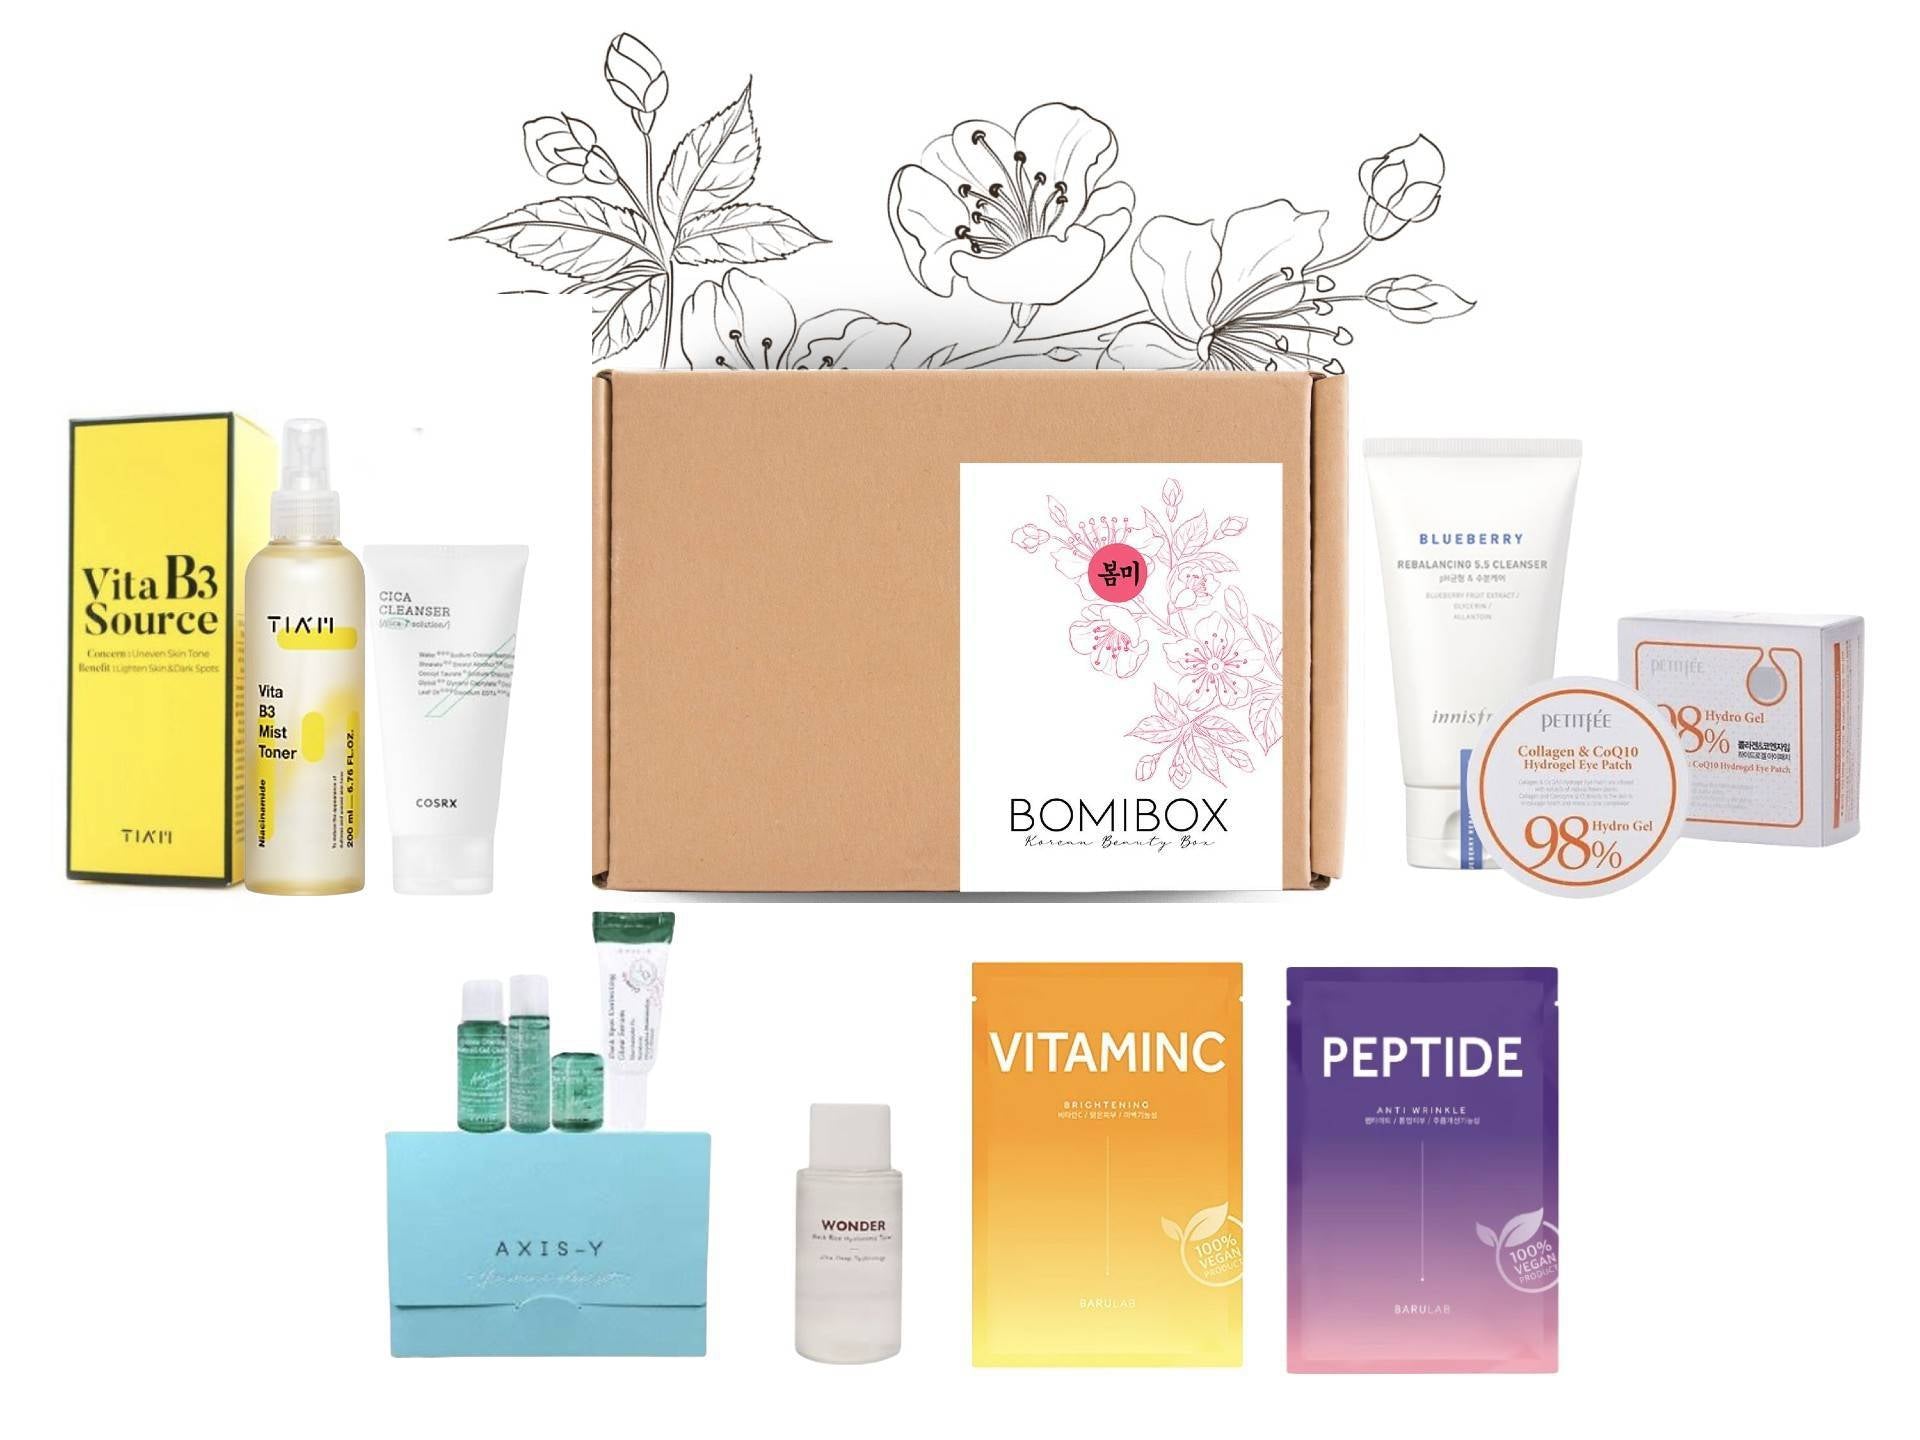 Past Boxes-Bomibox Holiday Bliss #11 - Korean Beauty Box Monthly Korean Skincare Subscription